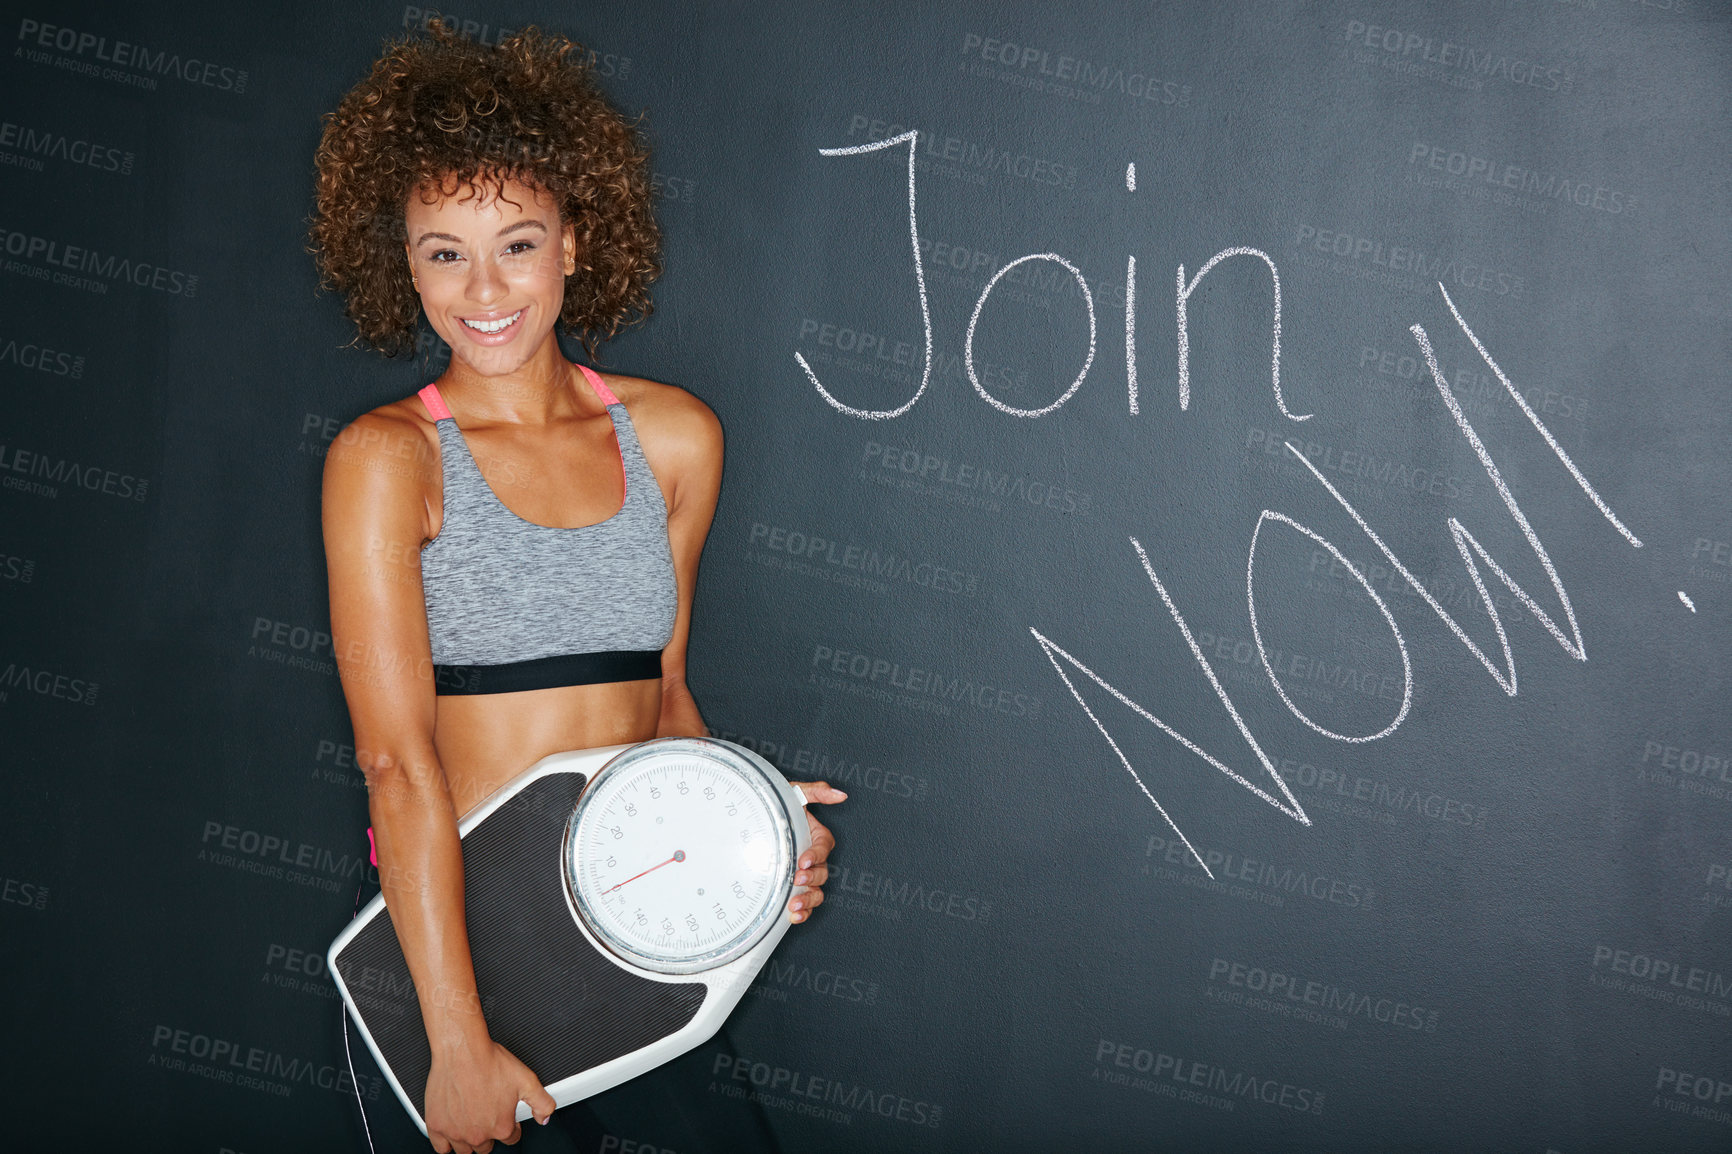 Buy stock photo Shot of a woman holding a scale against a chalk background with a message